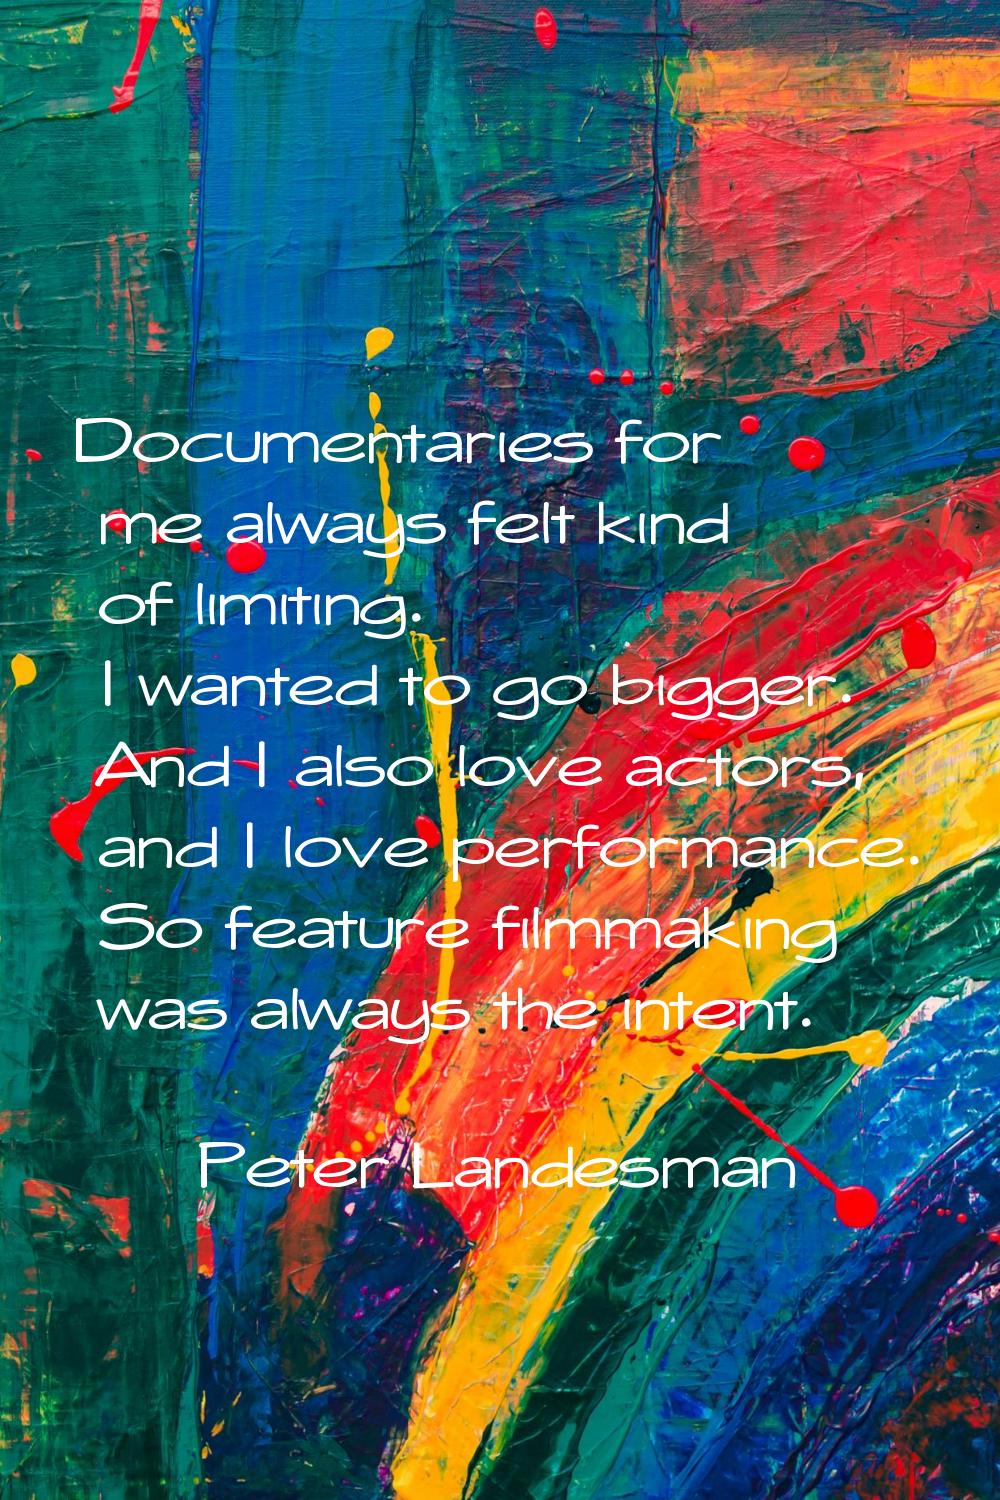 Documentaries for me always felt kind of limiting. I wanted to go bigger. And I also love actors, a